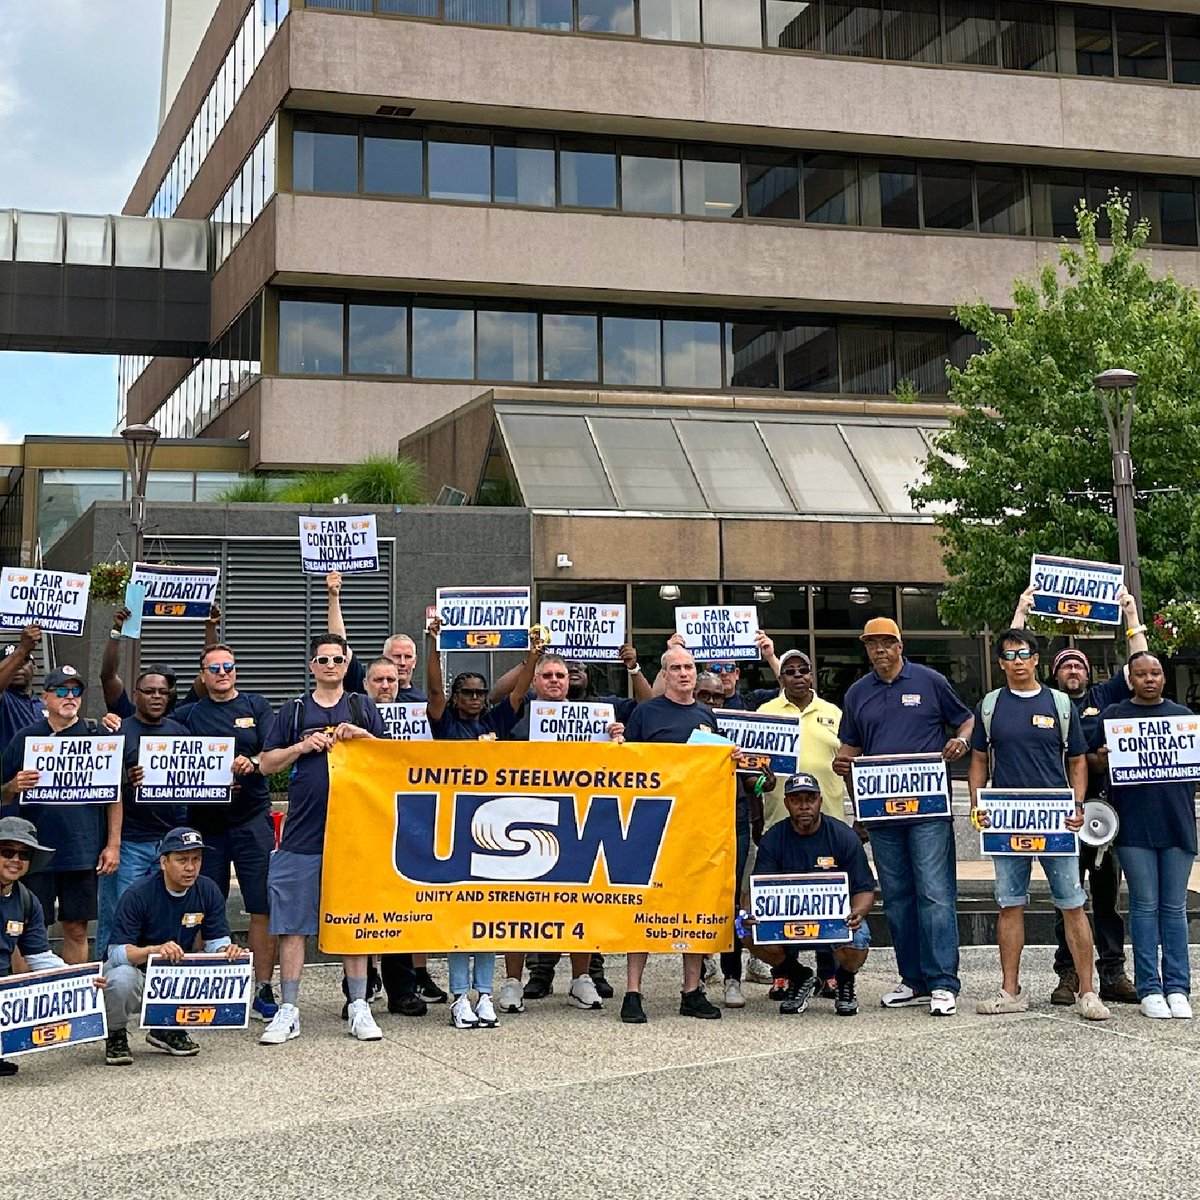 About two dozen USW Local 6129 members who work at Silgan Containers in Edison, N.J., demonstrated this week outside Silgan’s annual shareholders meeting in Stamford, Conn., calling on the company to negotiate in good faith and address workers’ concerns. #EverybodysUnion #1u